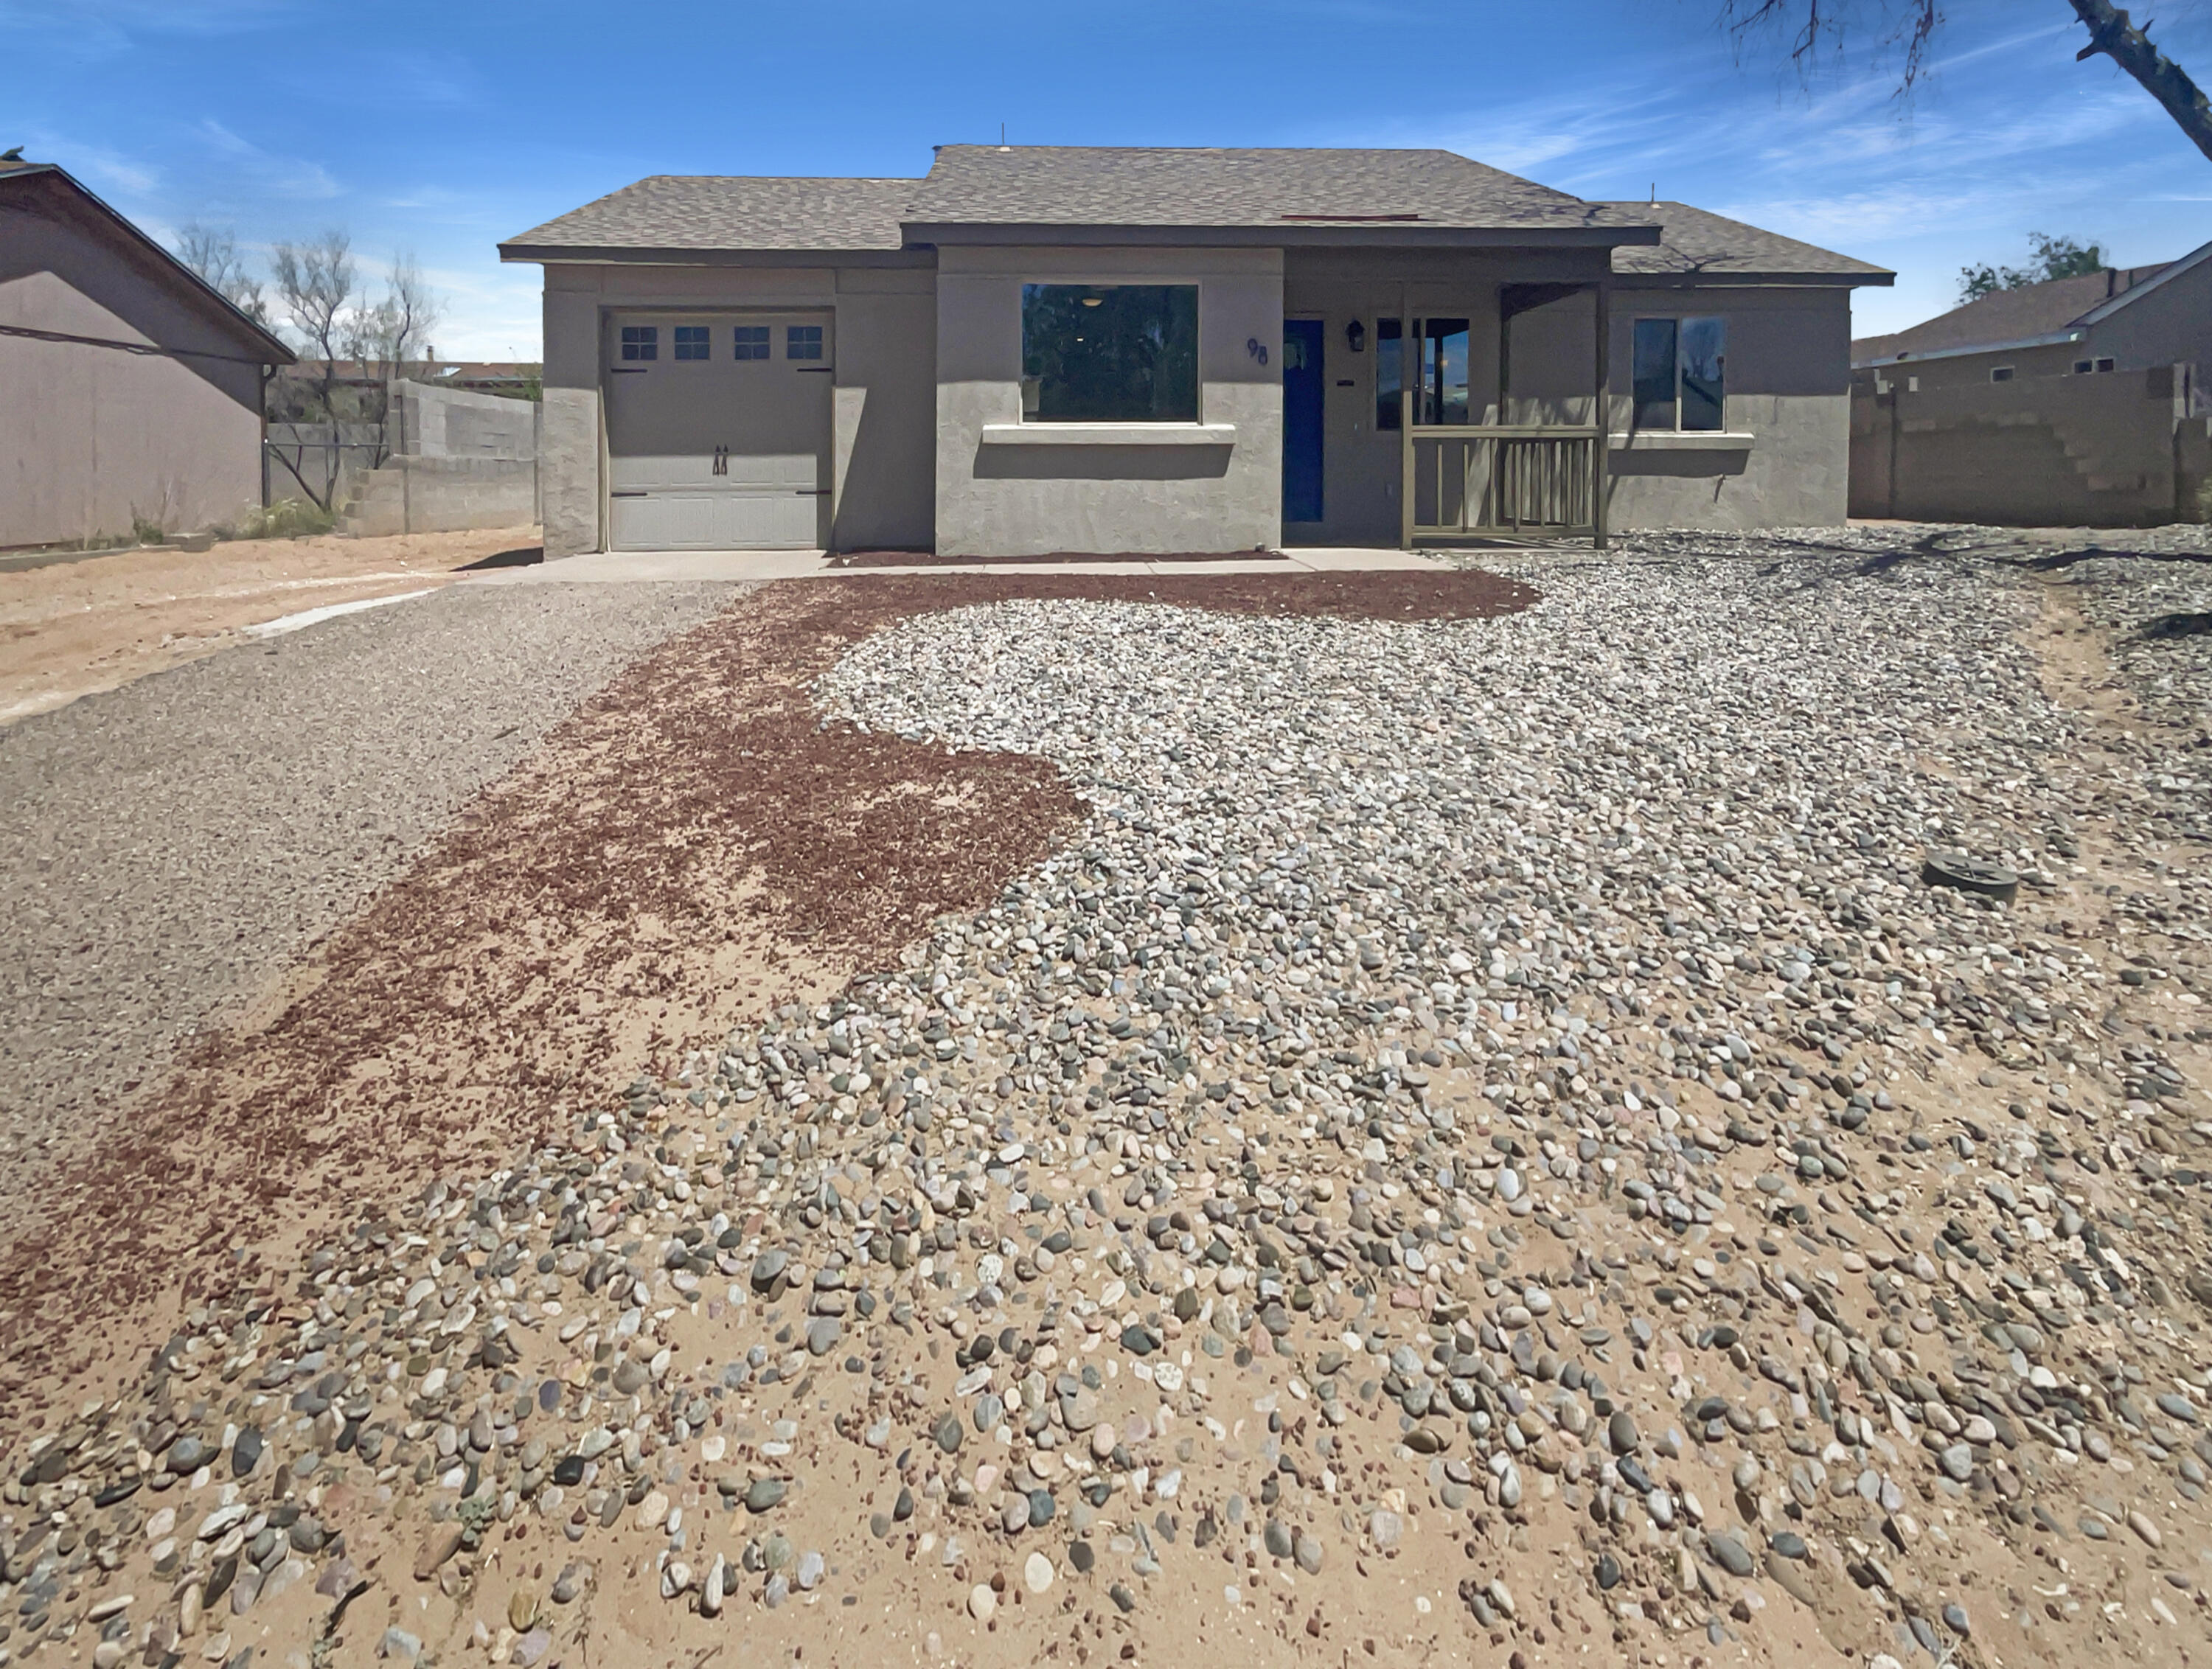 This Rio Rancho one-story home offers quartz countertops, and a one-car garage.